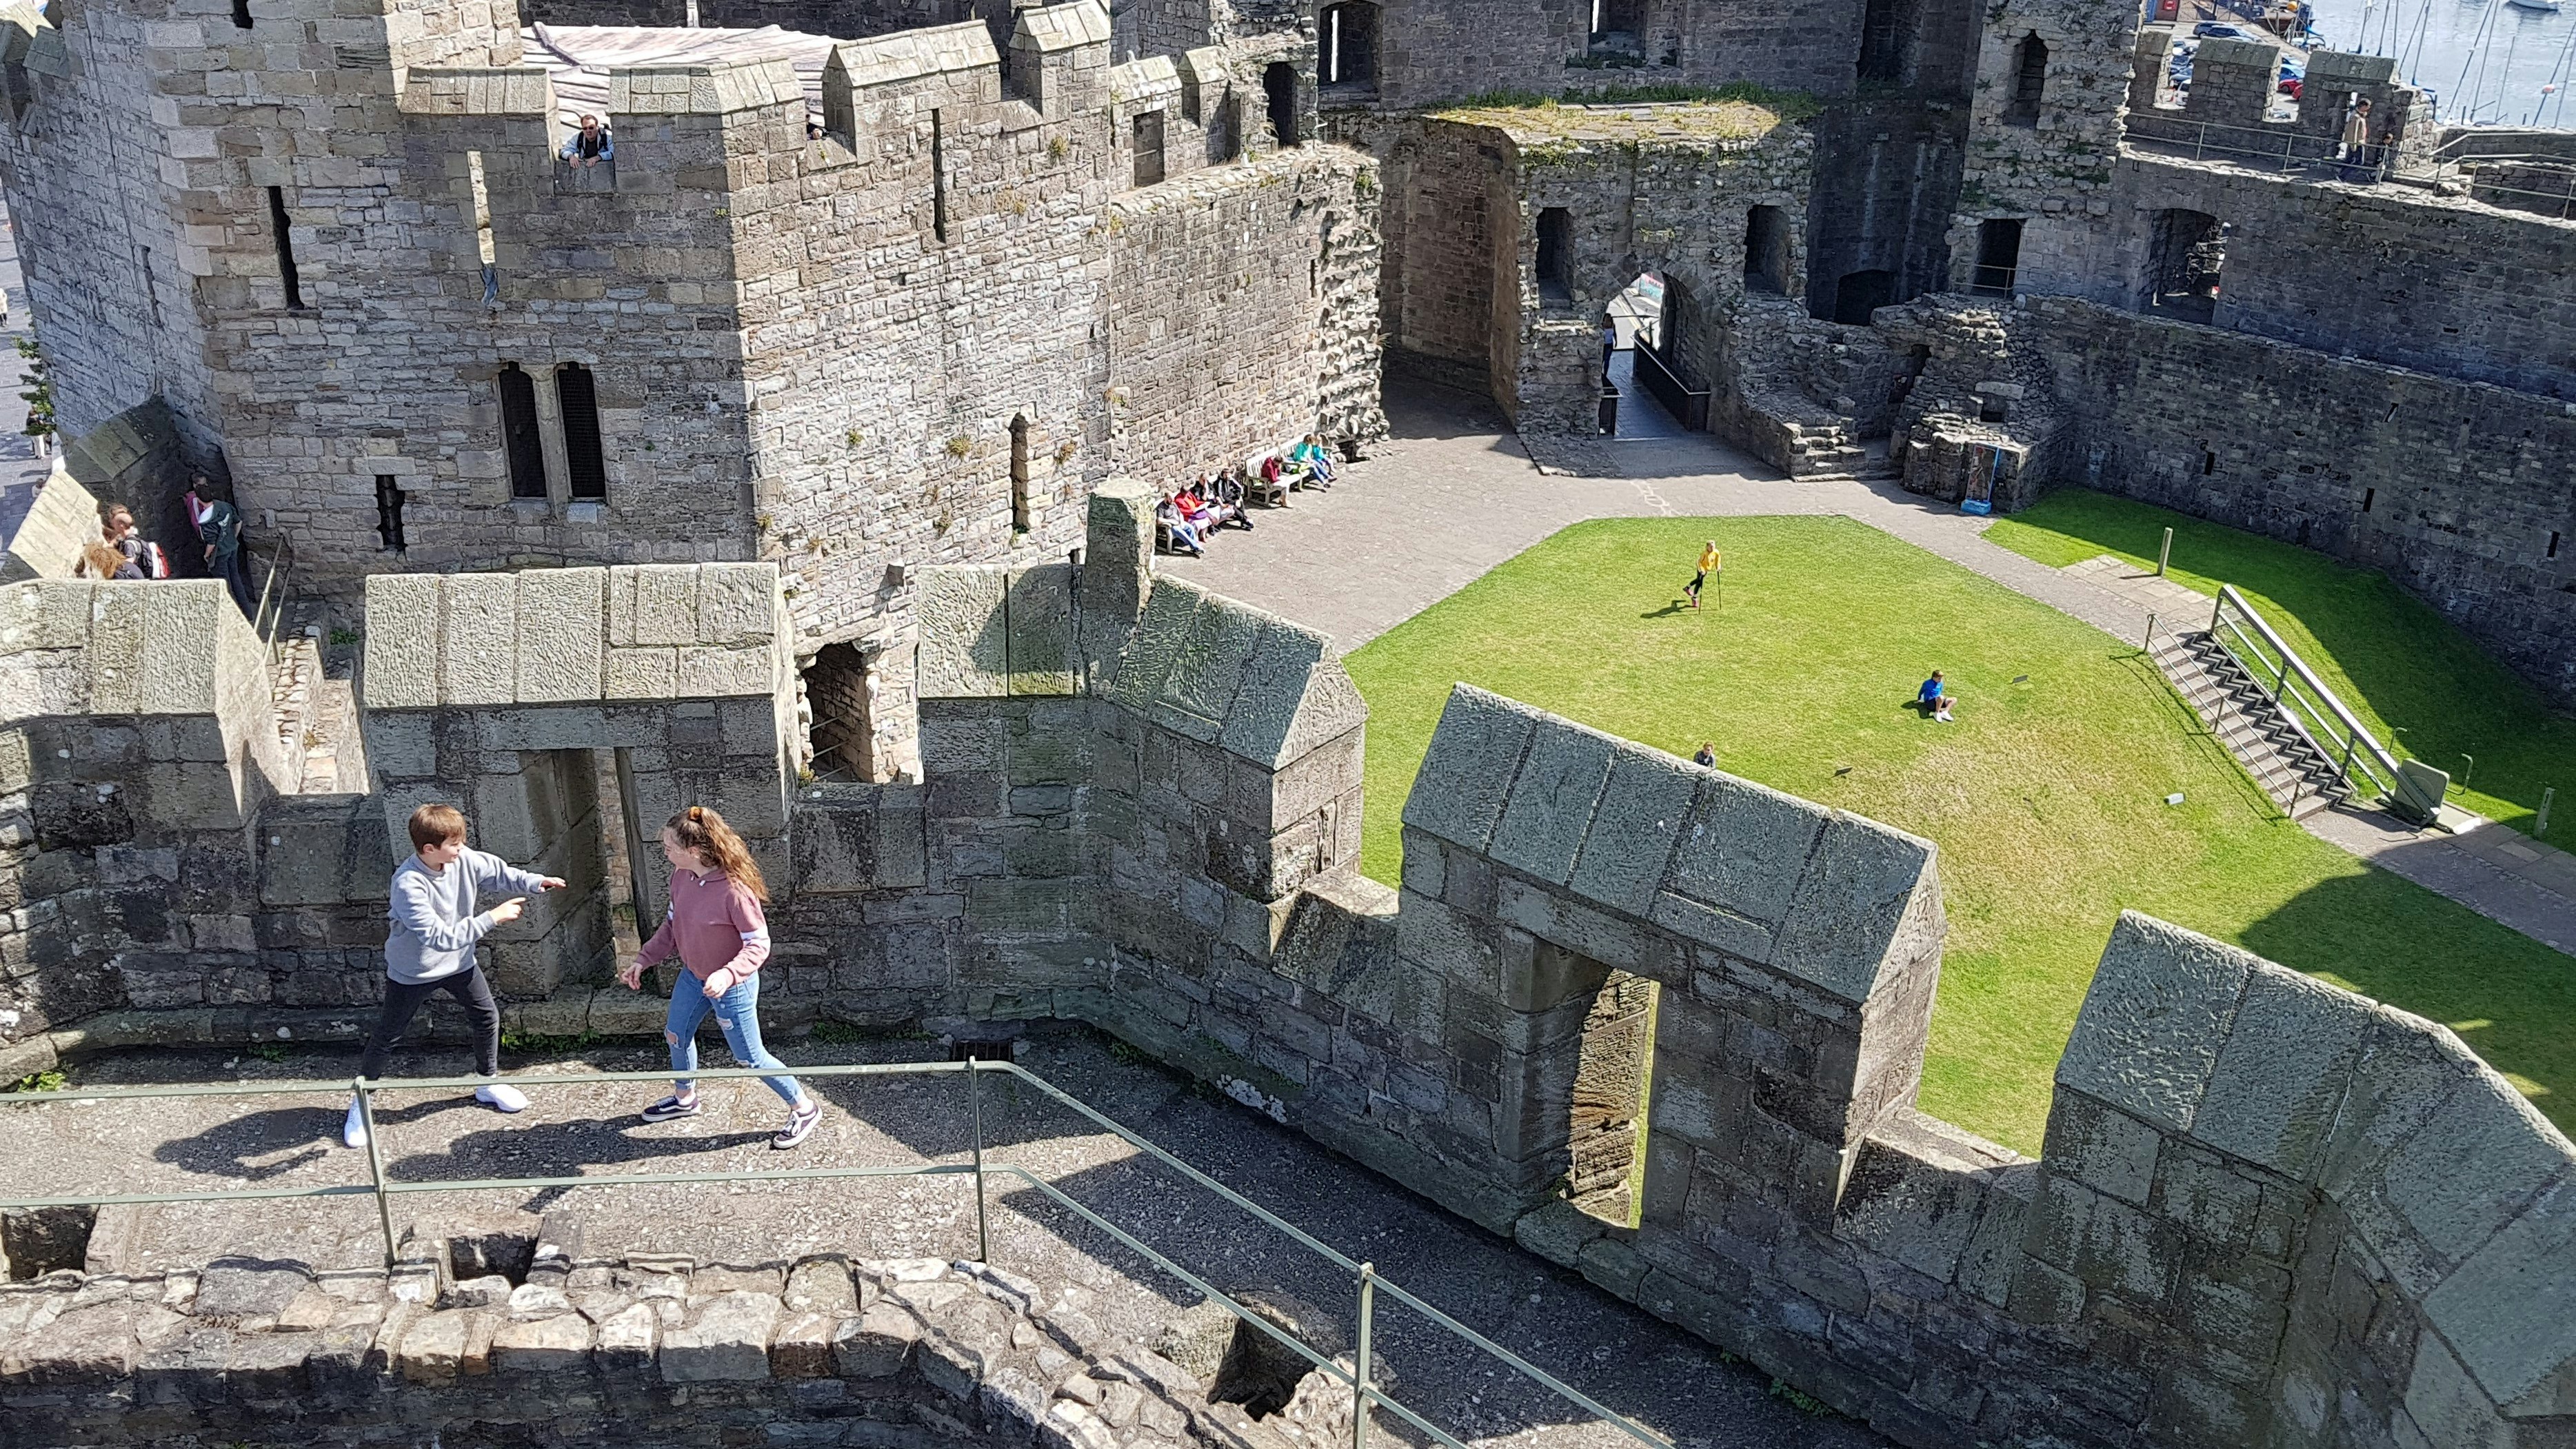 Two tweens in jeans and sweatshirts pretend to spar near stone crenelations at Caernarfon Castle in Wales. Behind them is a green lawn far below where more families play and explore. In the very far background to the right, you can just make out the masts of ships behind the castle. 